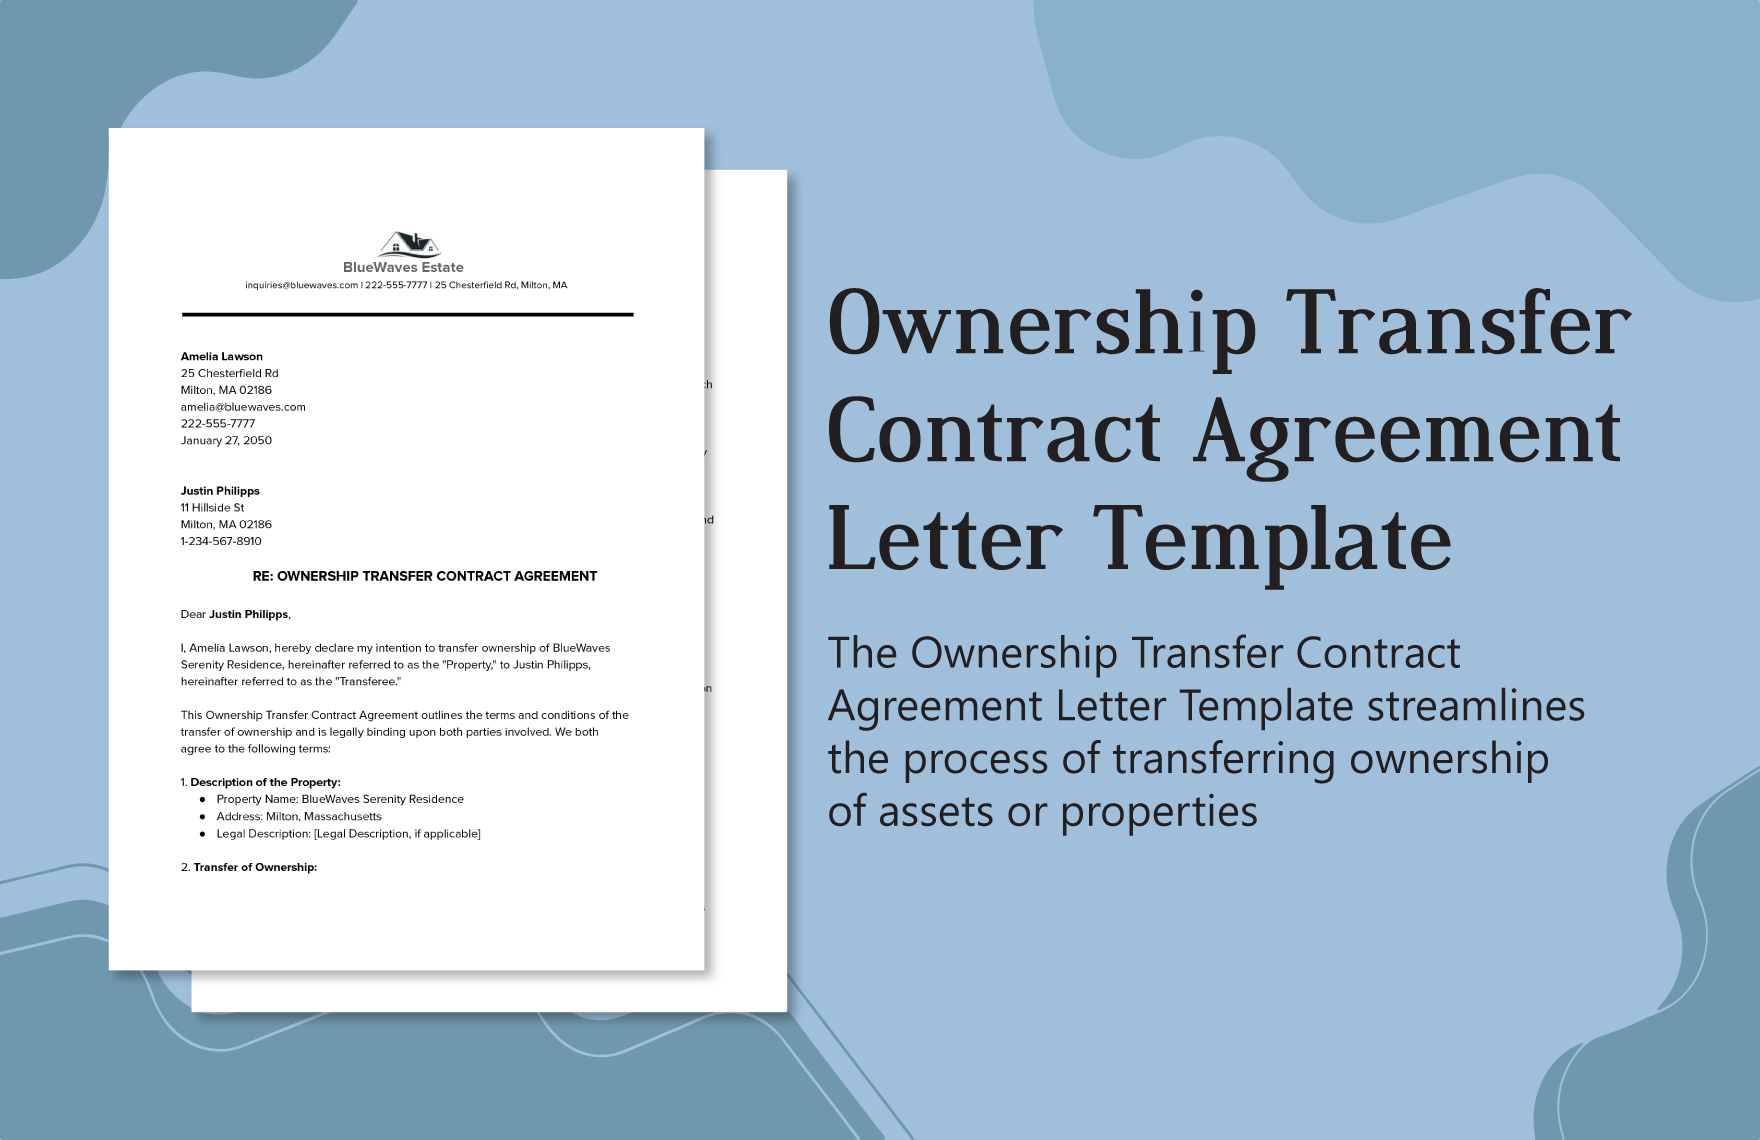 Ownership Transfer Contract Agreement Letter Template